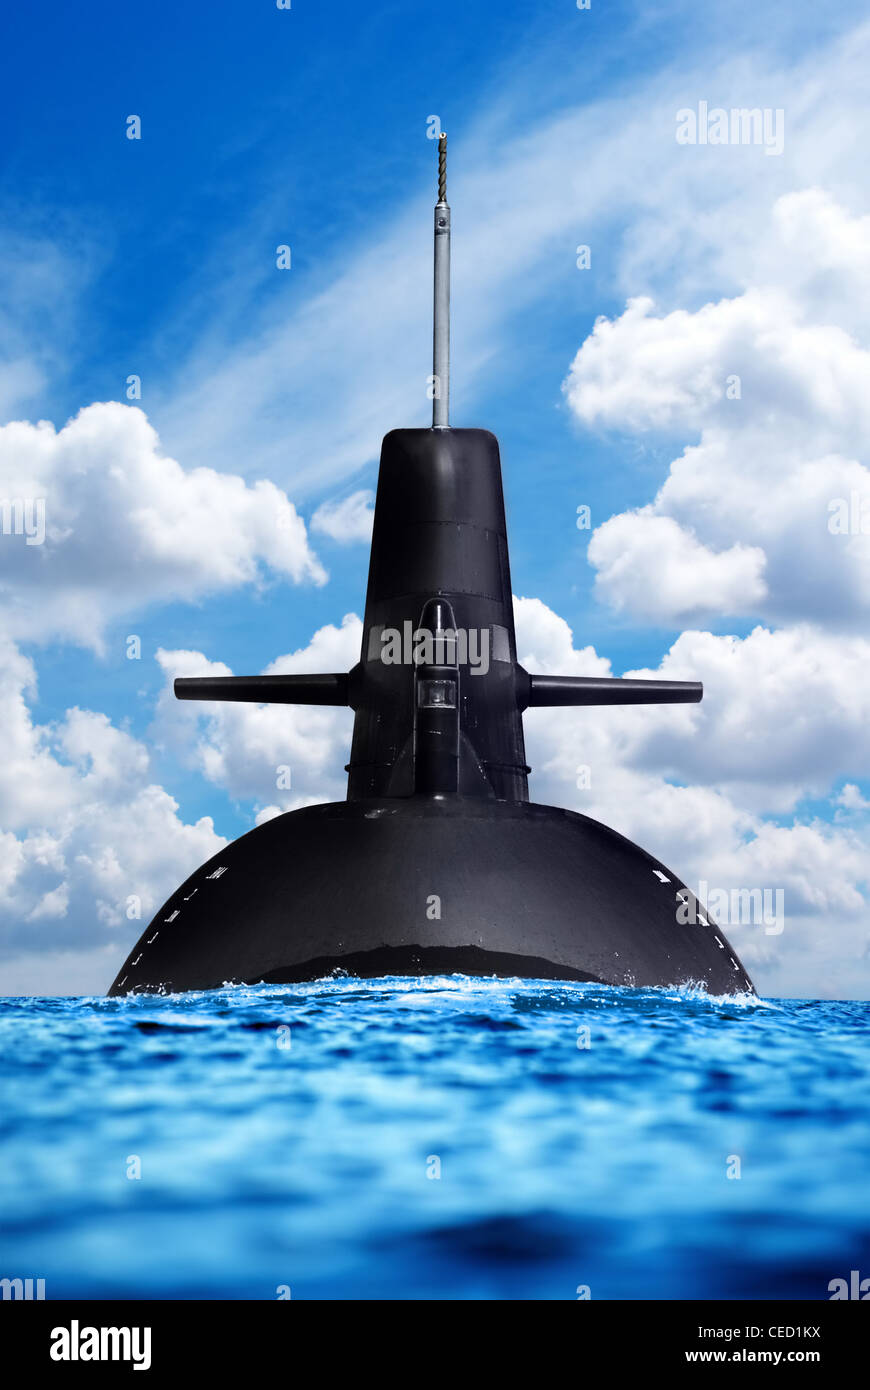 Army Forces and it's weapon on land, sea and air. Nuclear submarine in the ocean. Stock Photo